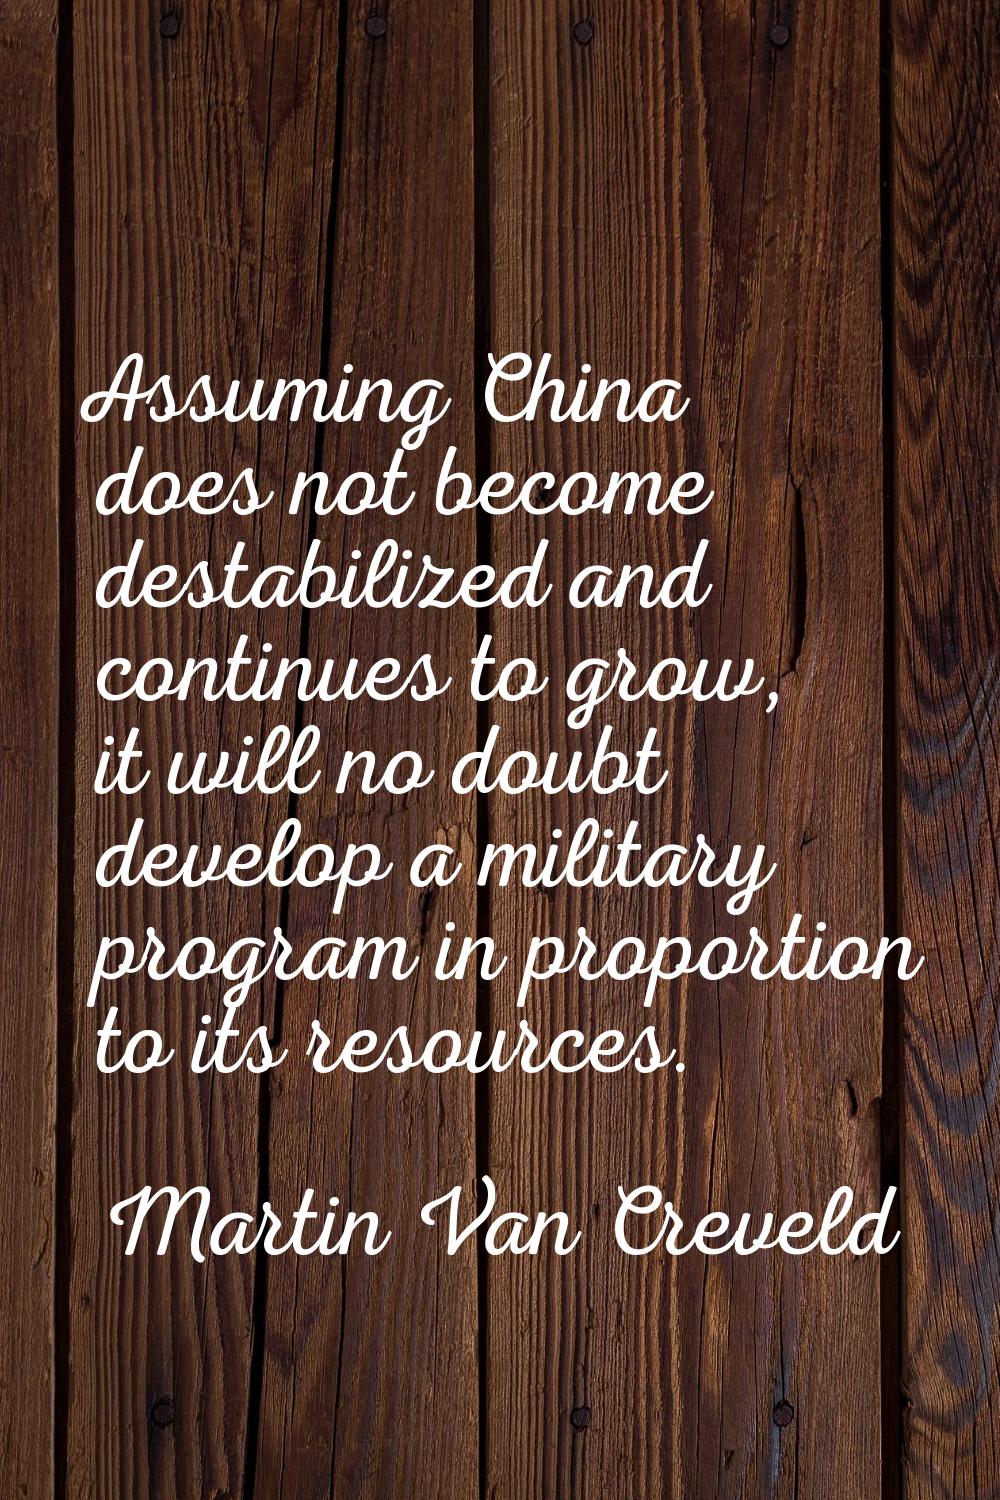 Assuming China does not become destabilized and continues to grow, it will no doubt develop a milit